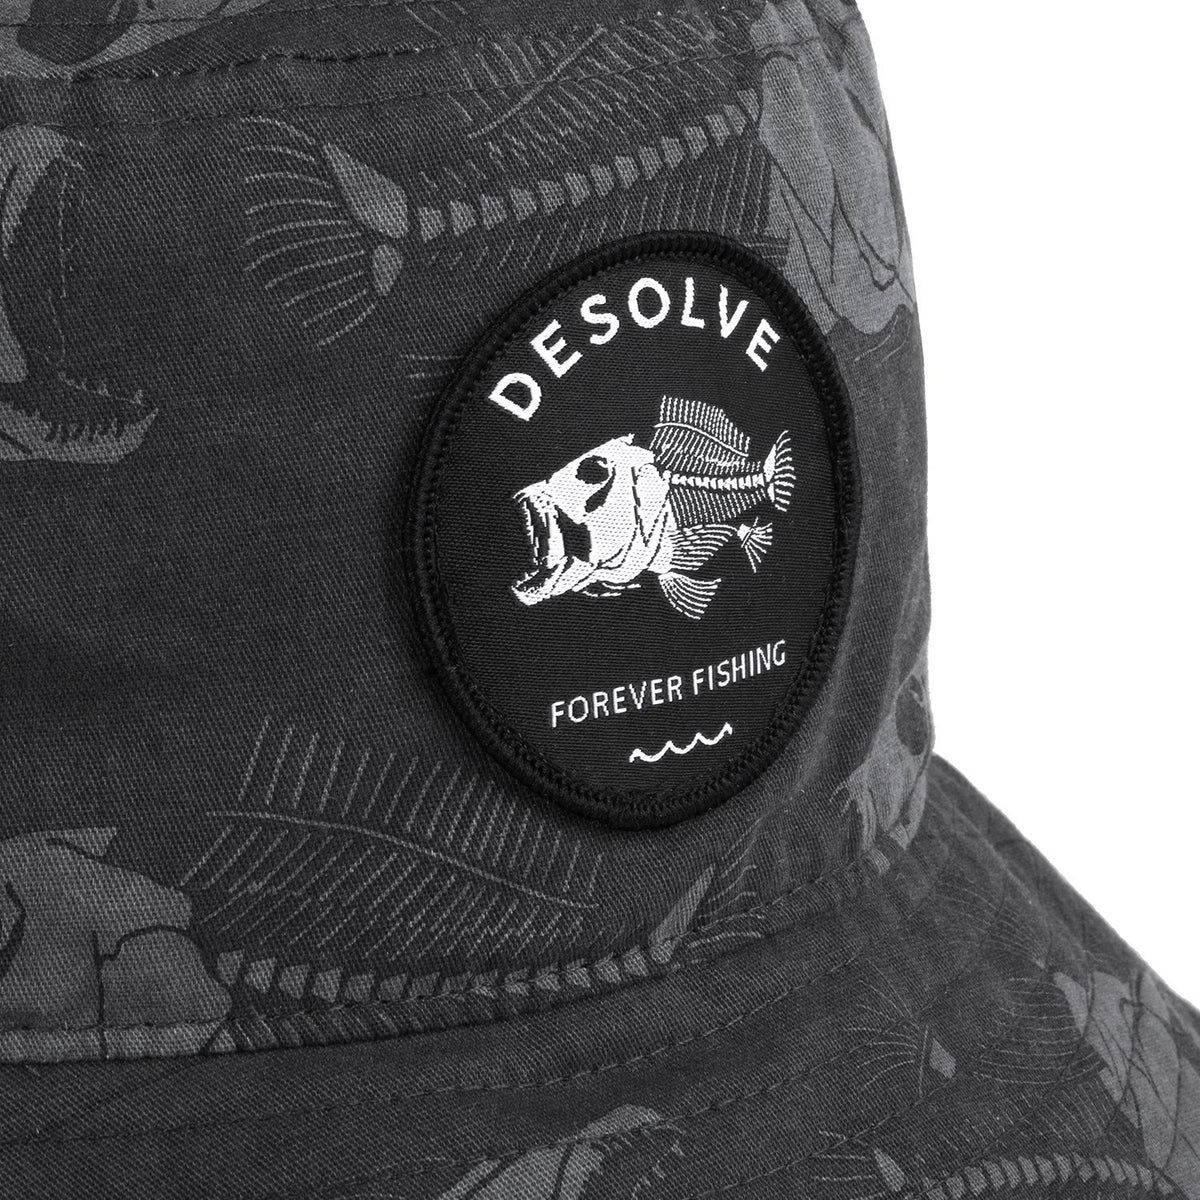 Desolve Supply Co, Snappy Bucket Hat, 100% Poly Cotton, One Size Fits  Most, Fishing Hat, Kids - Desolve Supply Co.